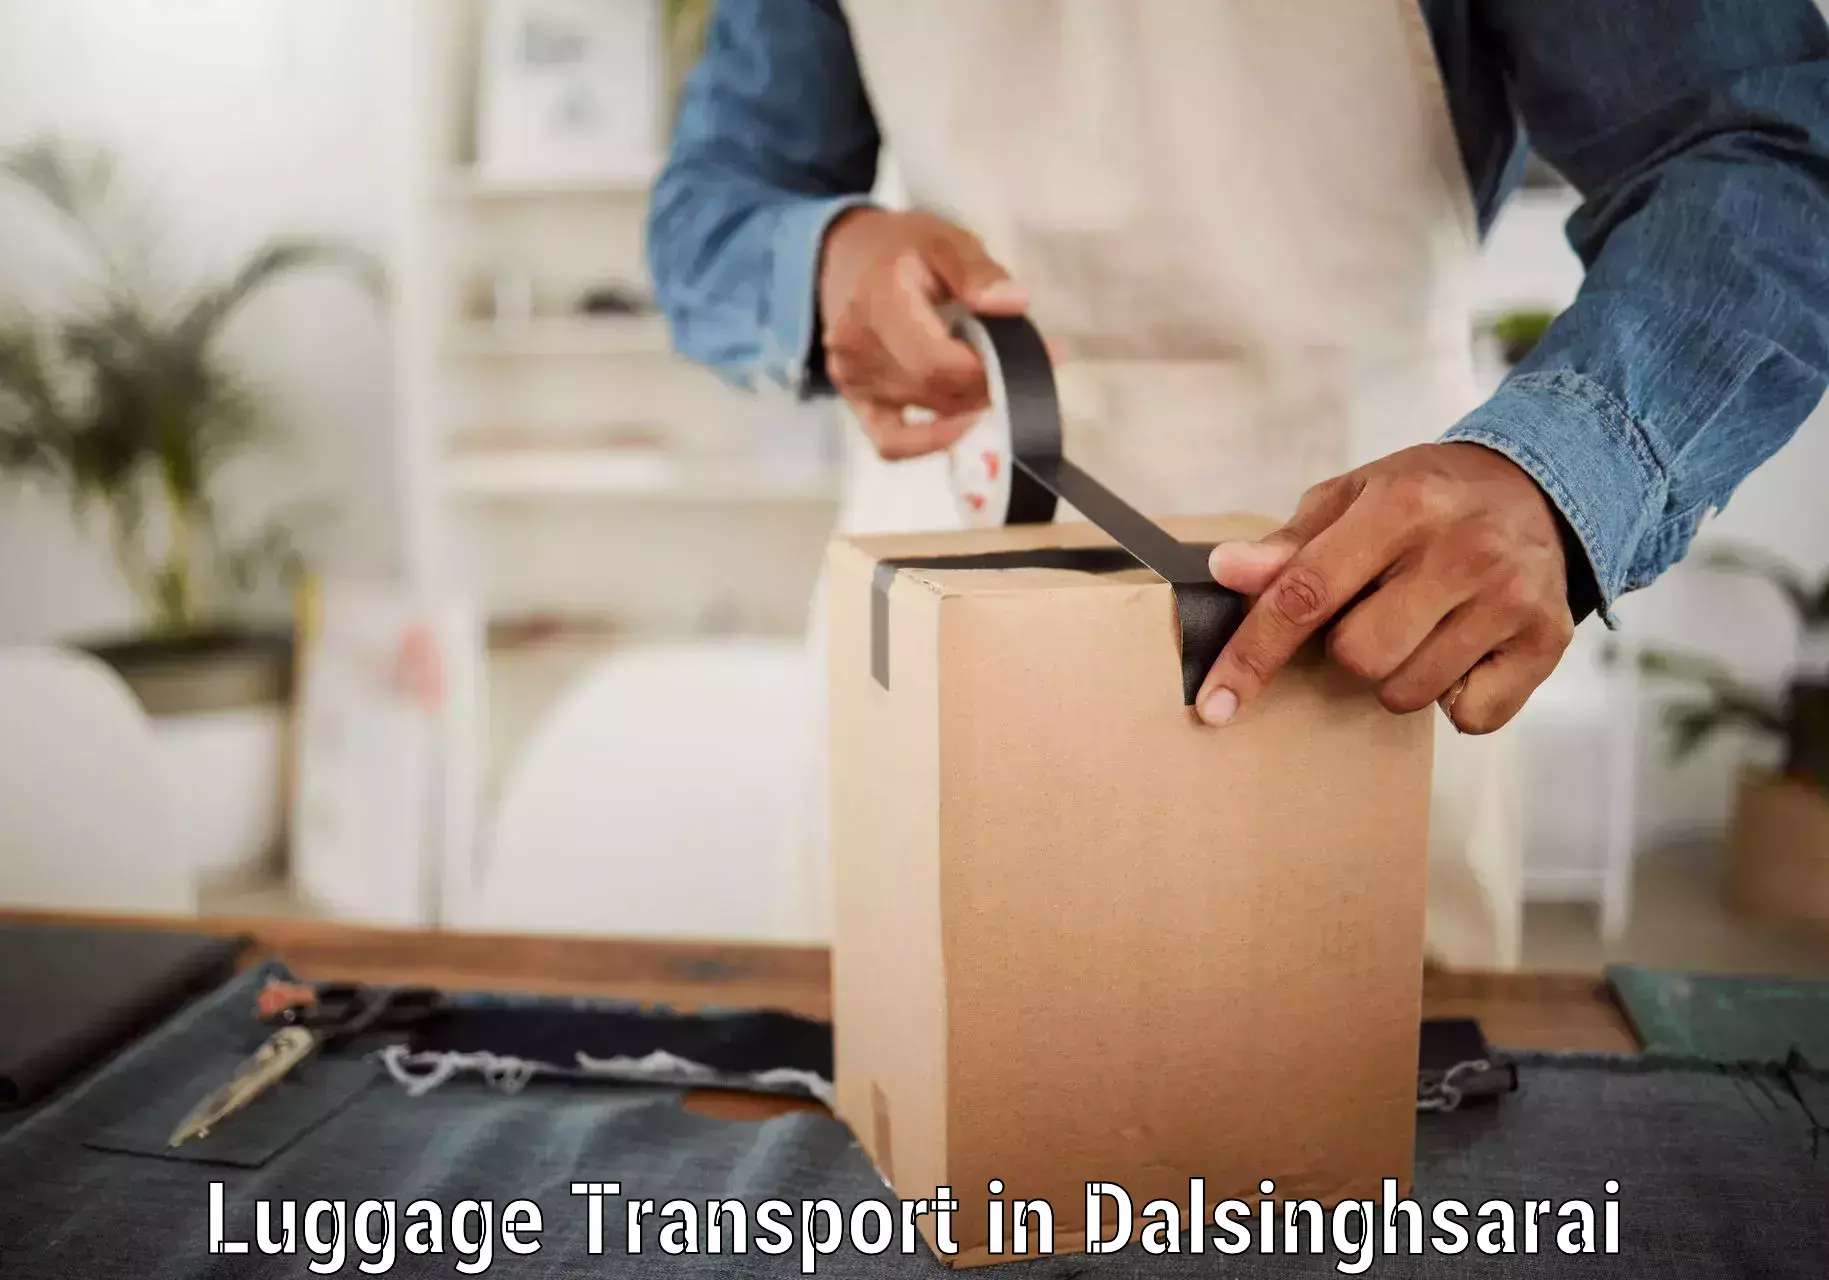 Hassle-free luggage shipping in Dalsinghsarai